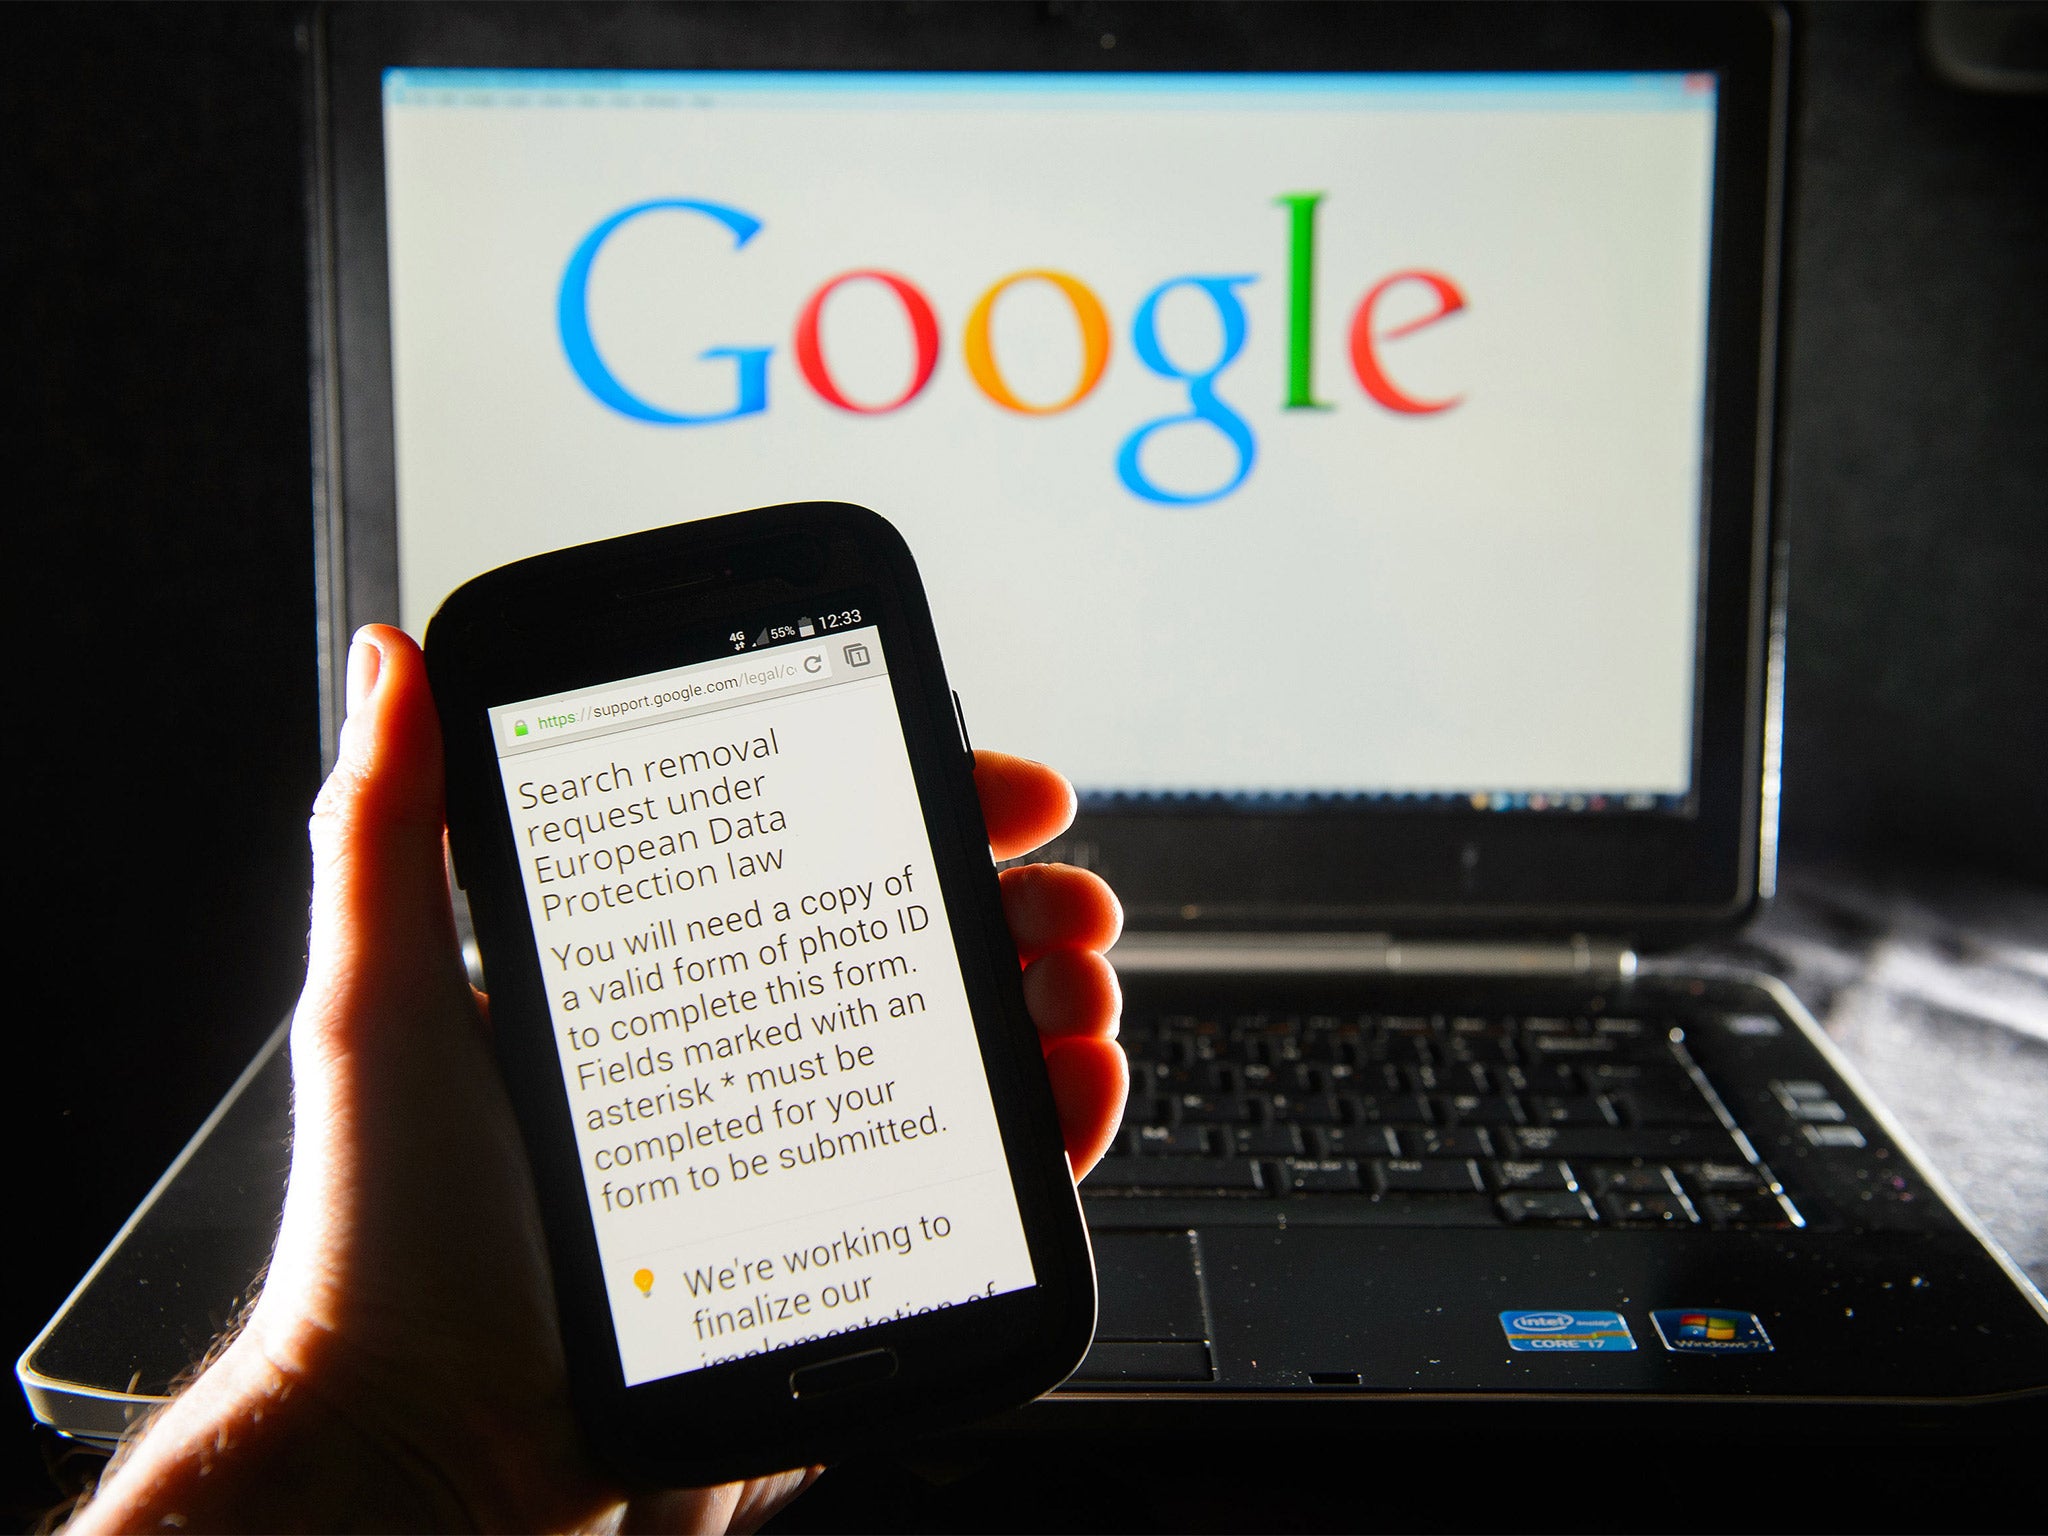 A Google search removal request displayed on the screen of a smart phone